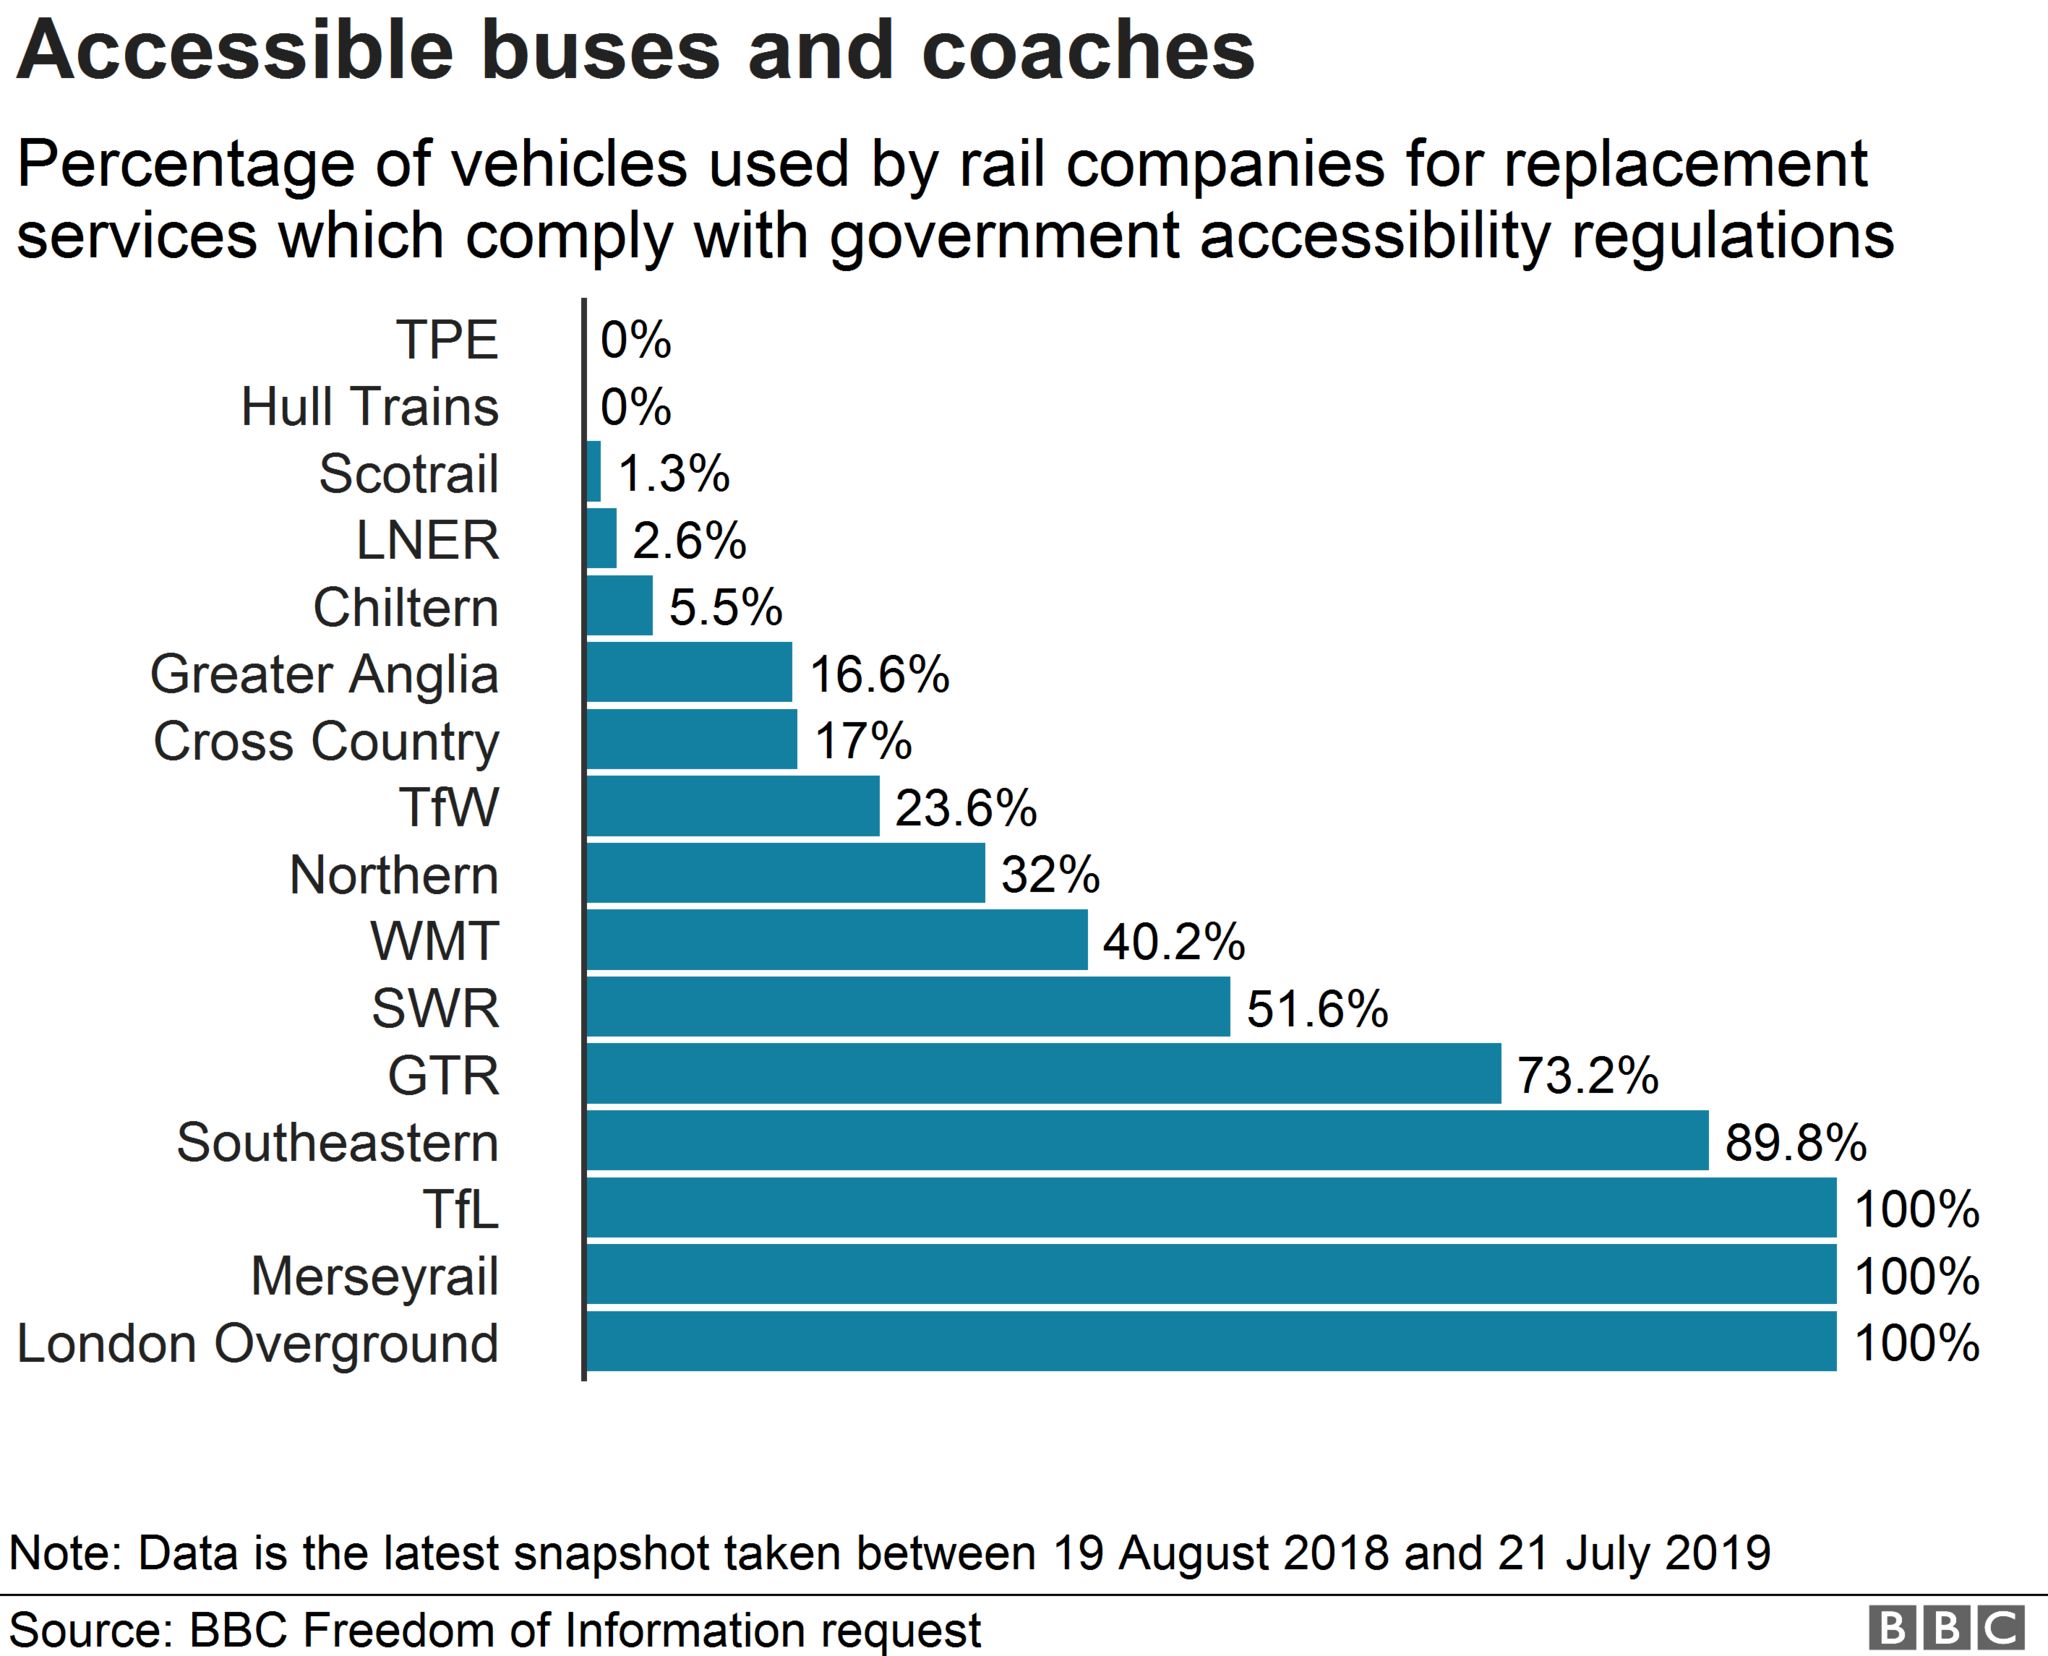 Percentage of accessible vehicles used by rail operator for rail replacement services